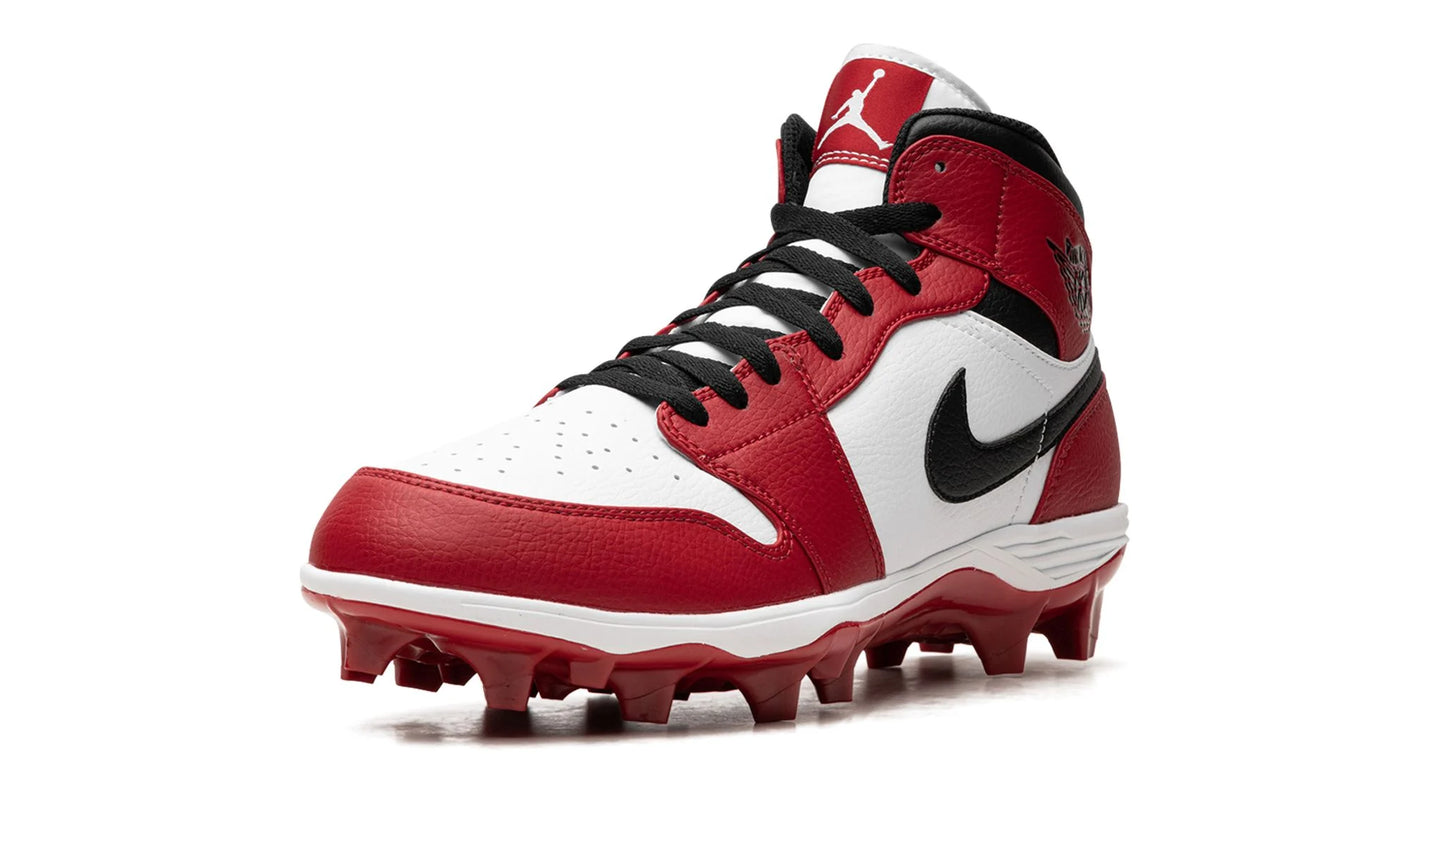 Jordan 1 Mid TD Chicago Football Cleats Single Shoe Front View